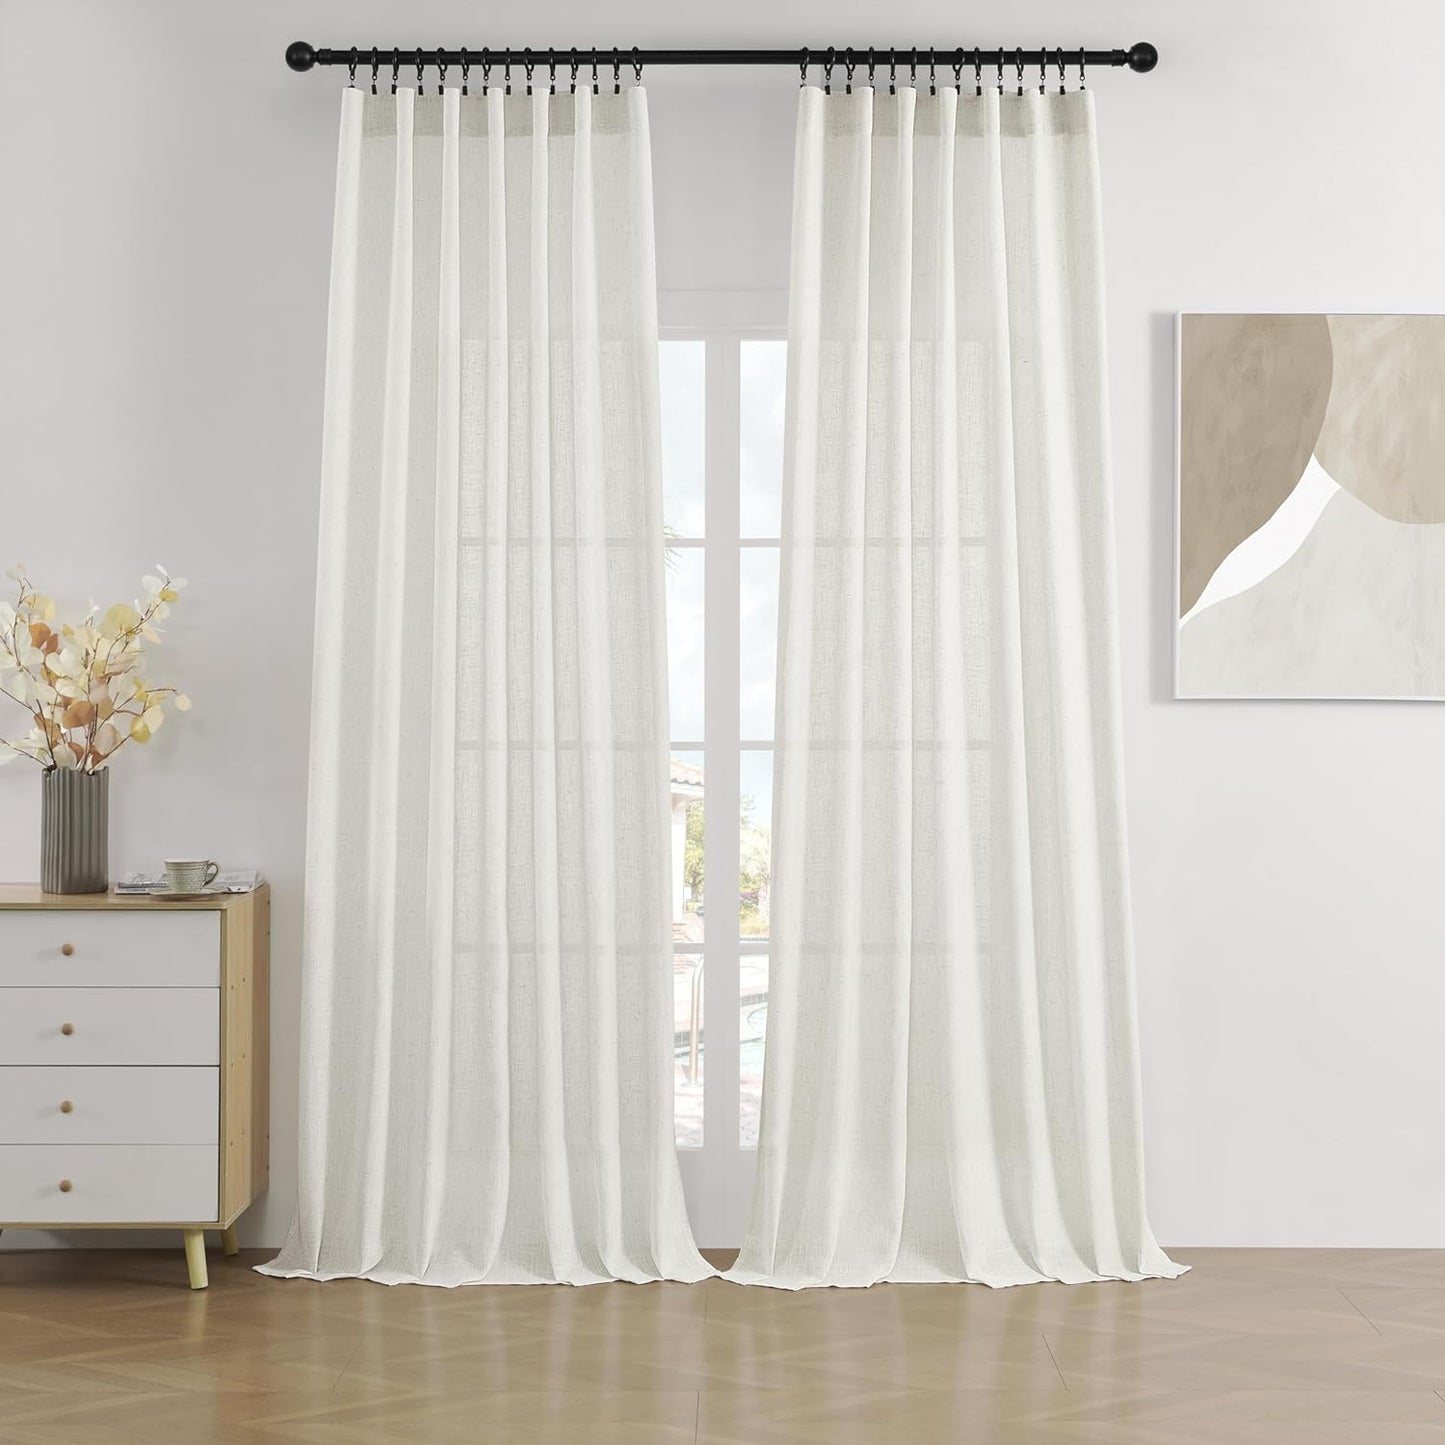 Joydeco Linen Curtains for Living Room,Semi-Sheer Curtains 108 Inches Long,Living Room Curtains 2 Panel Sets,White Curtains Pinch Pleated Curtains & Drapes(W52 X L108 Inch, Off-White)  Joydeco Off-White 52W X 90L Inch X 2 Panels 